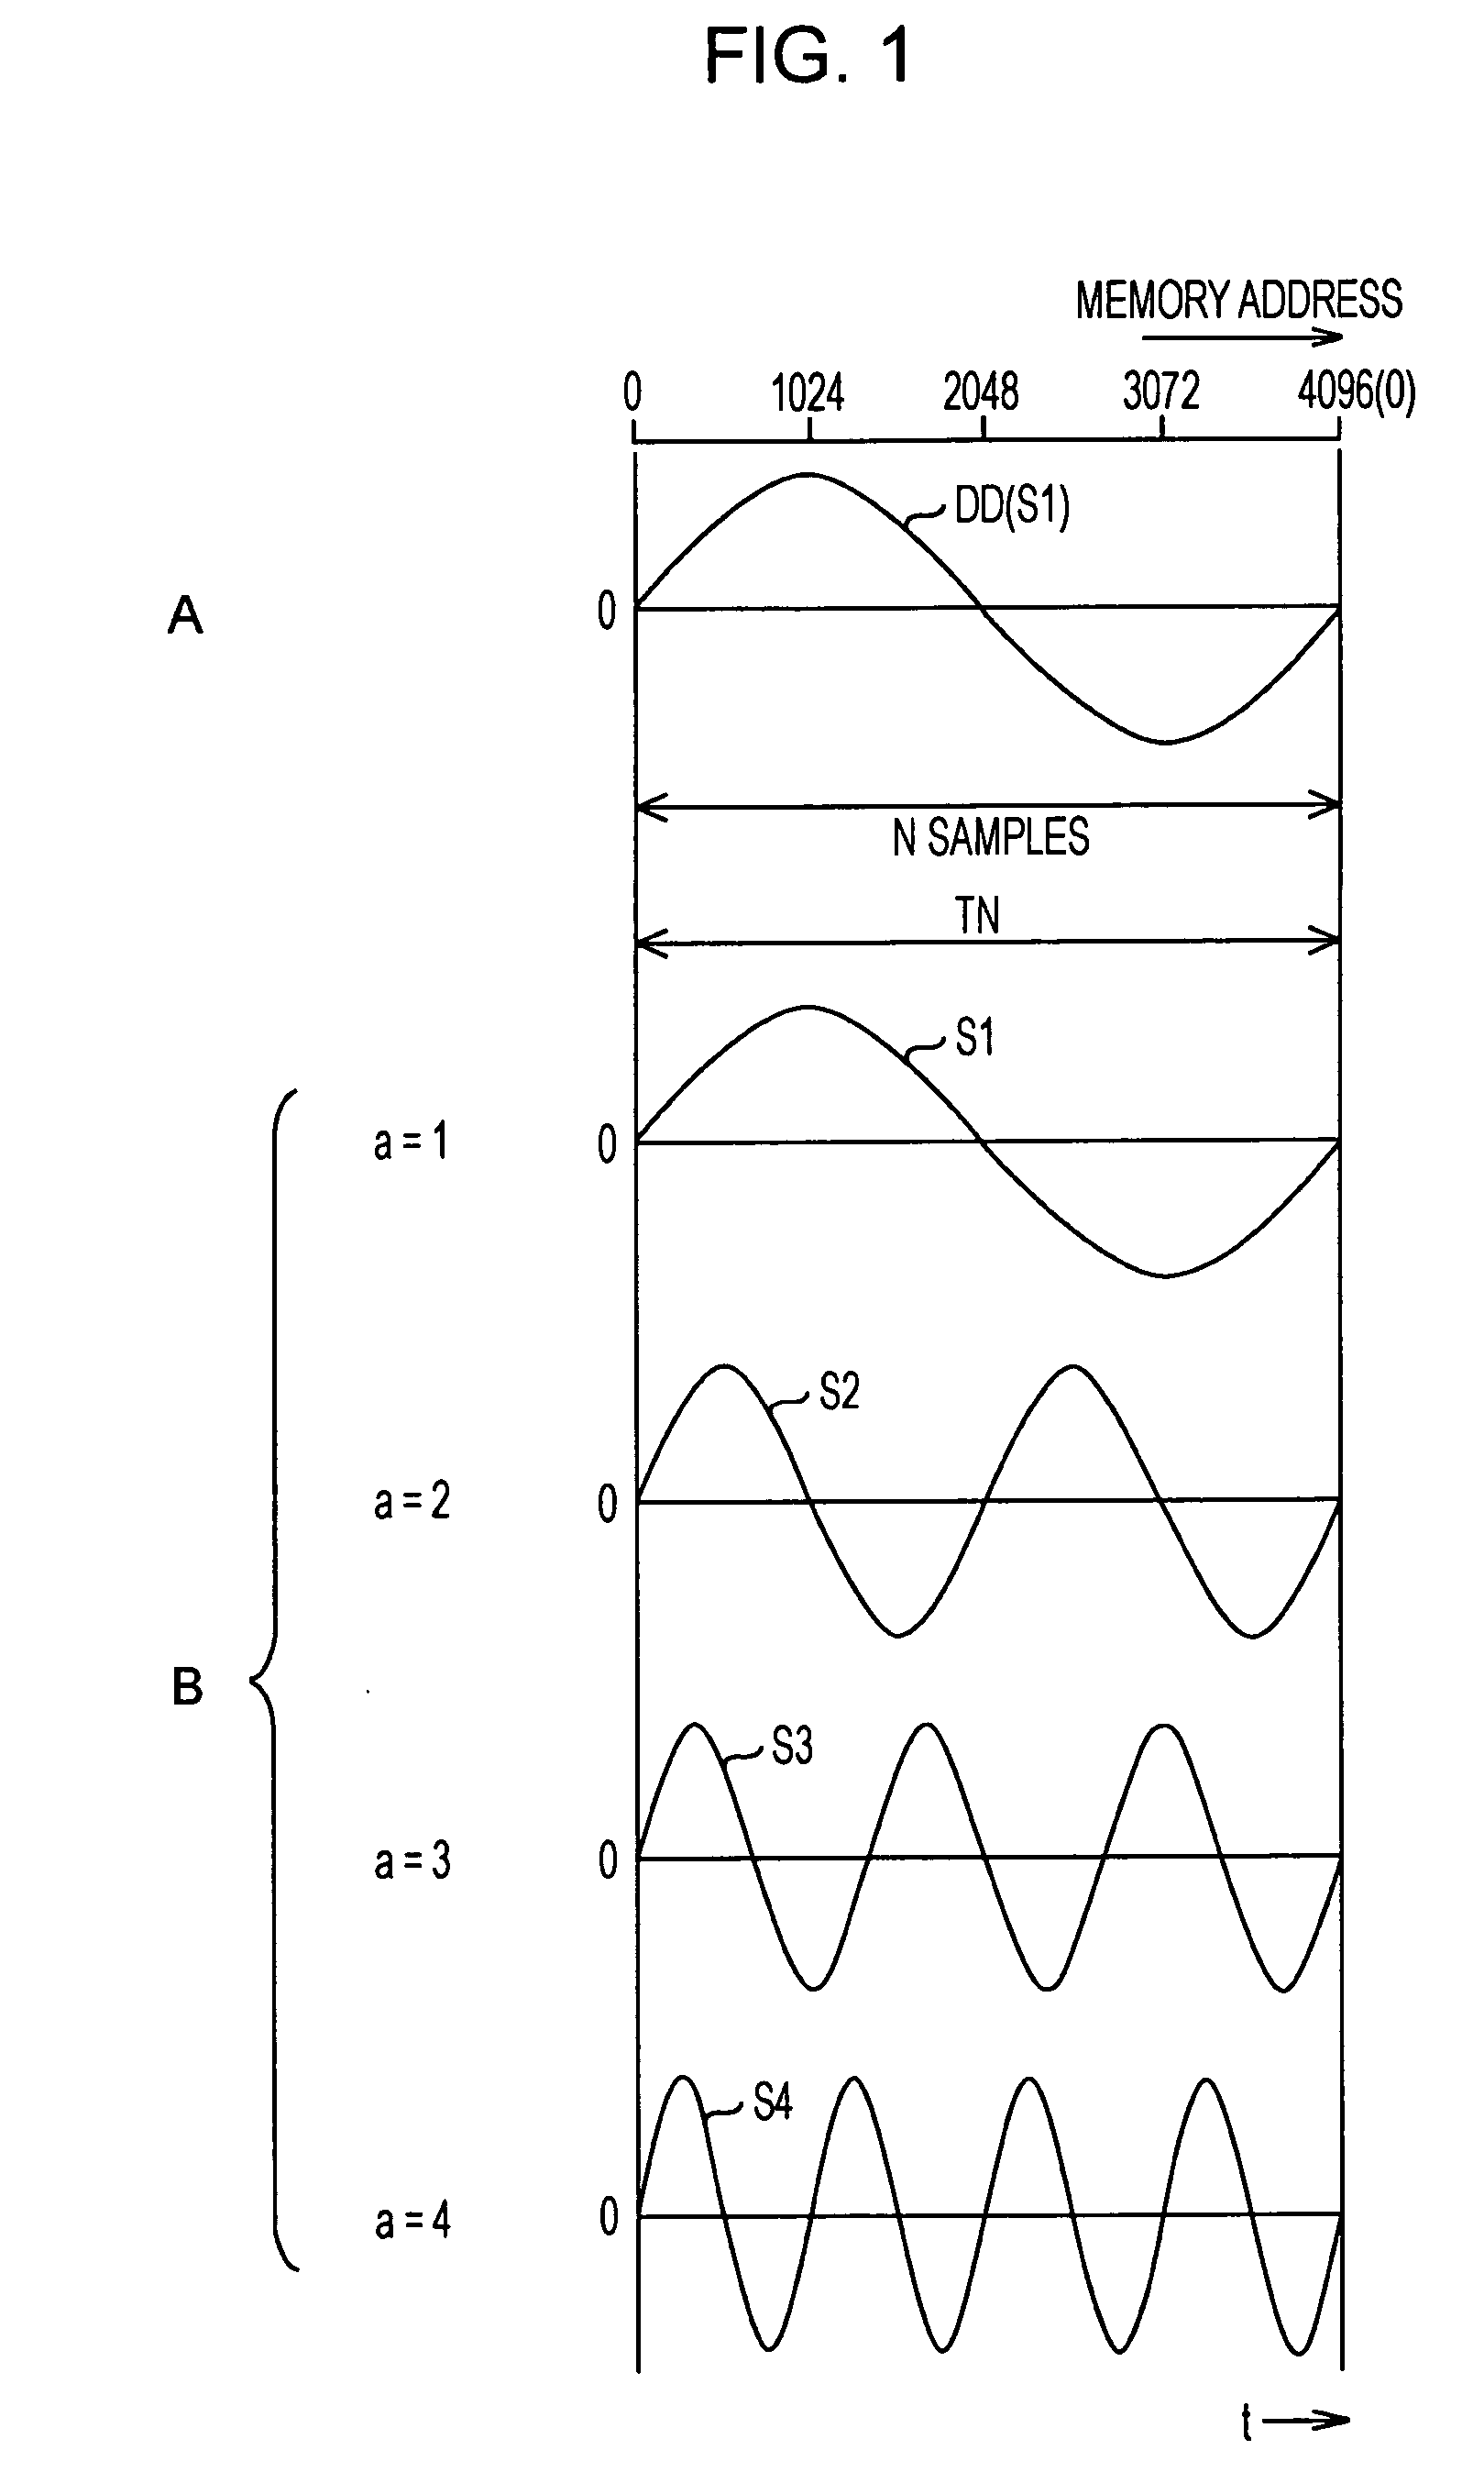 Apparatus and method for checking loudspeaker